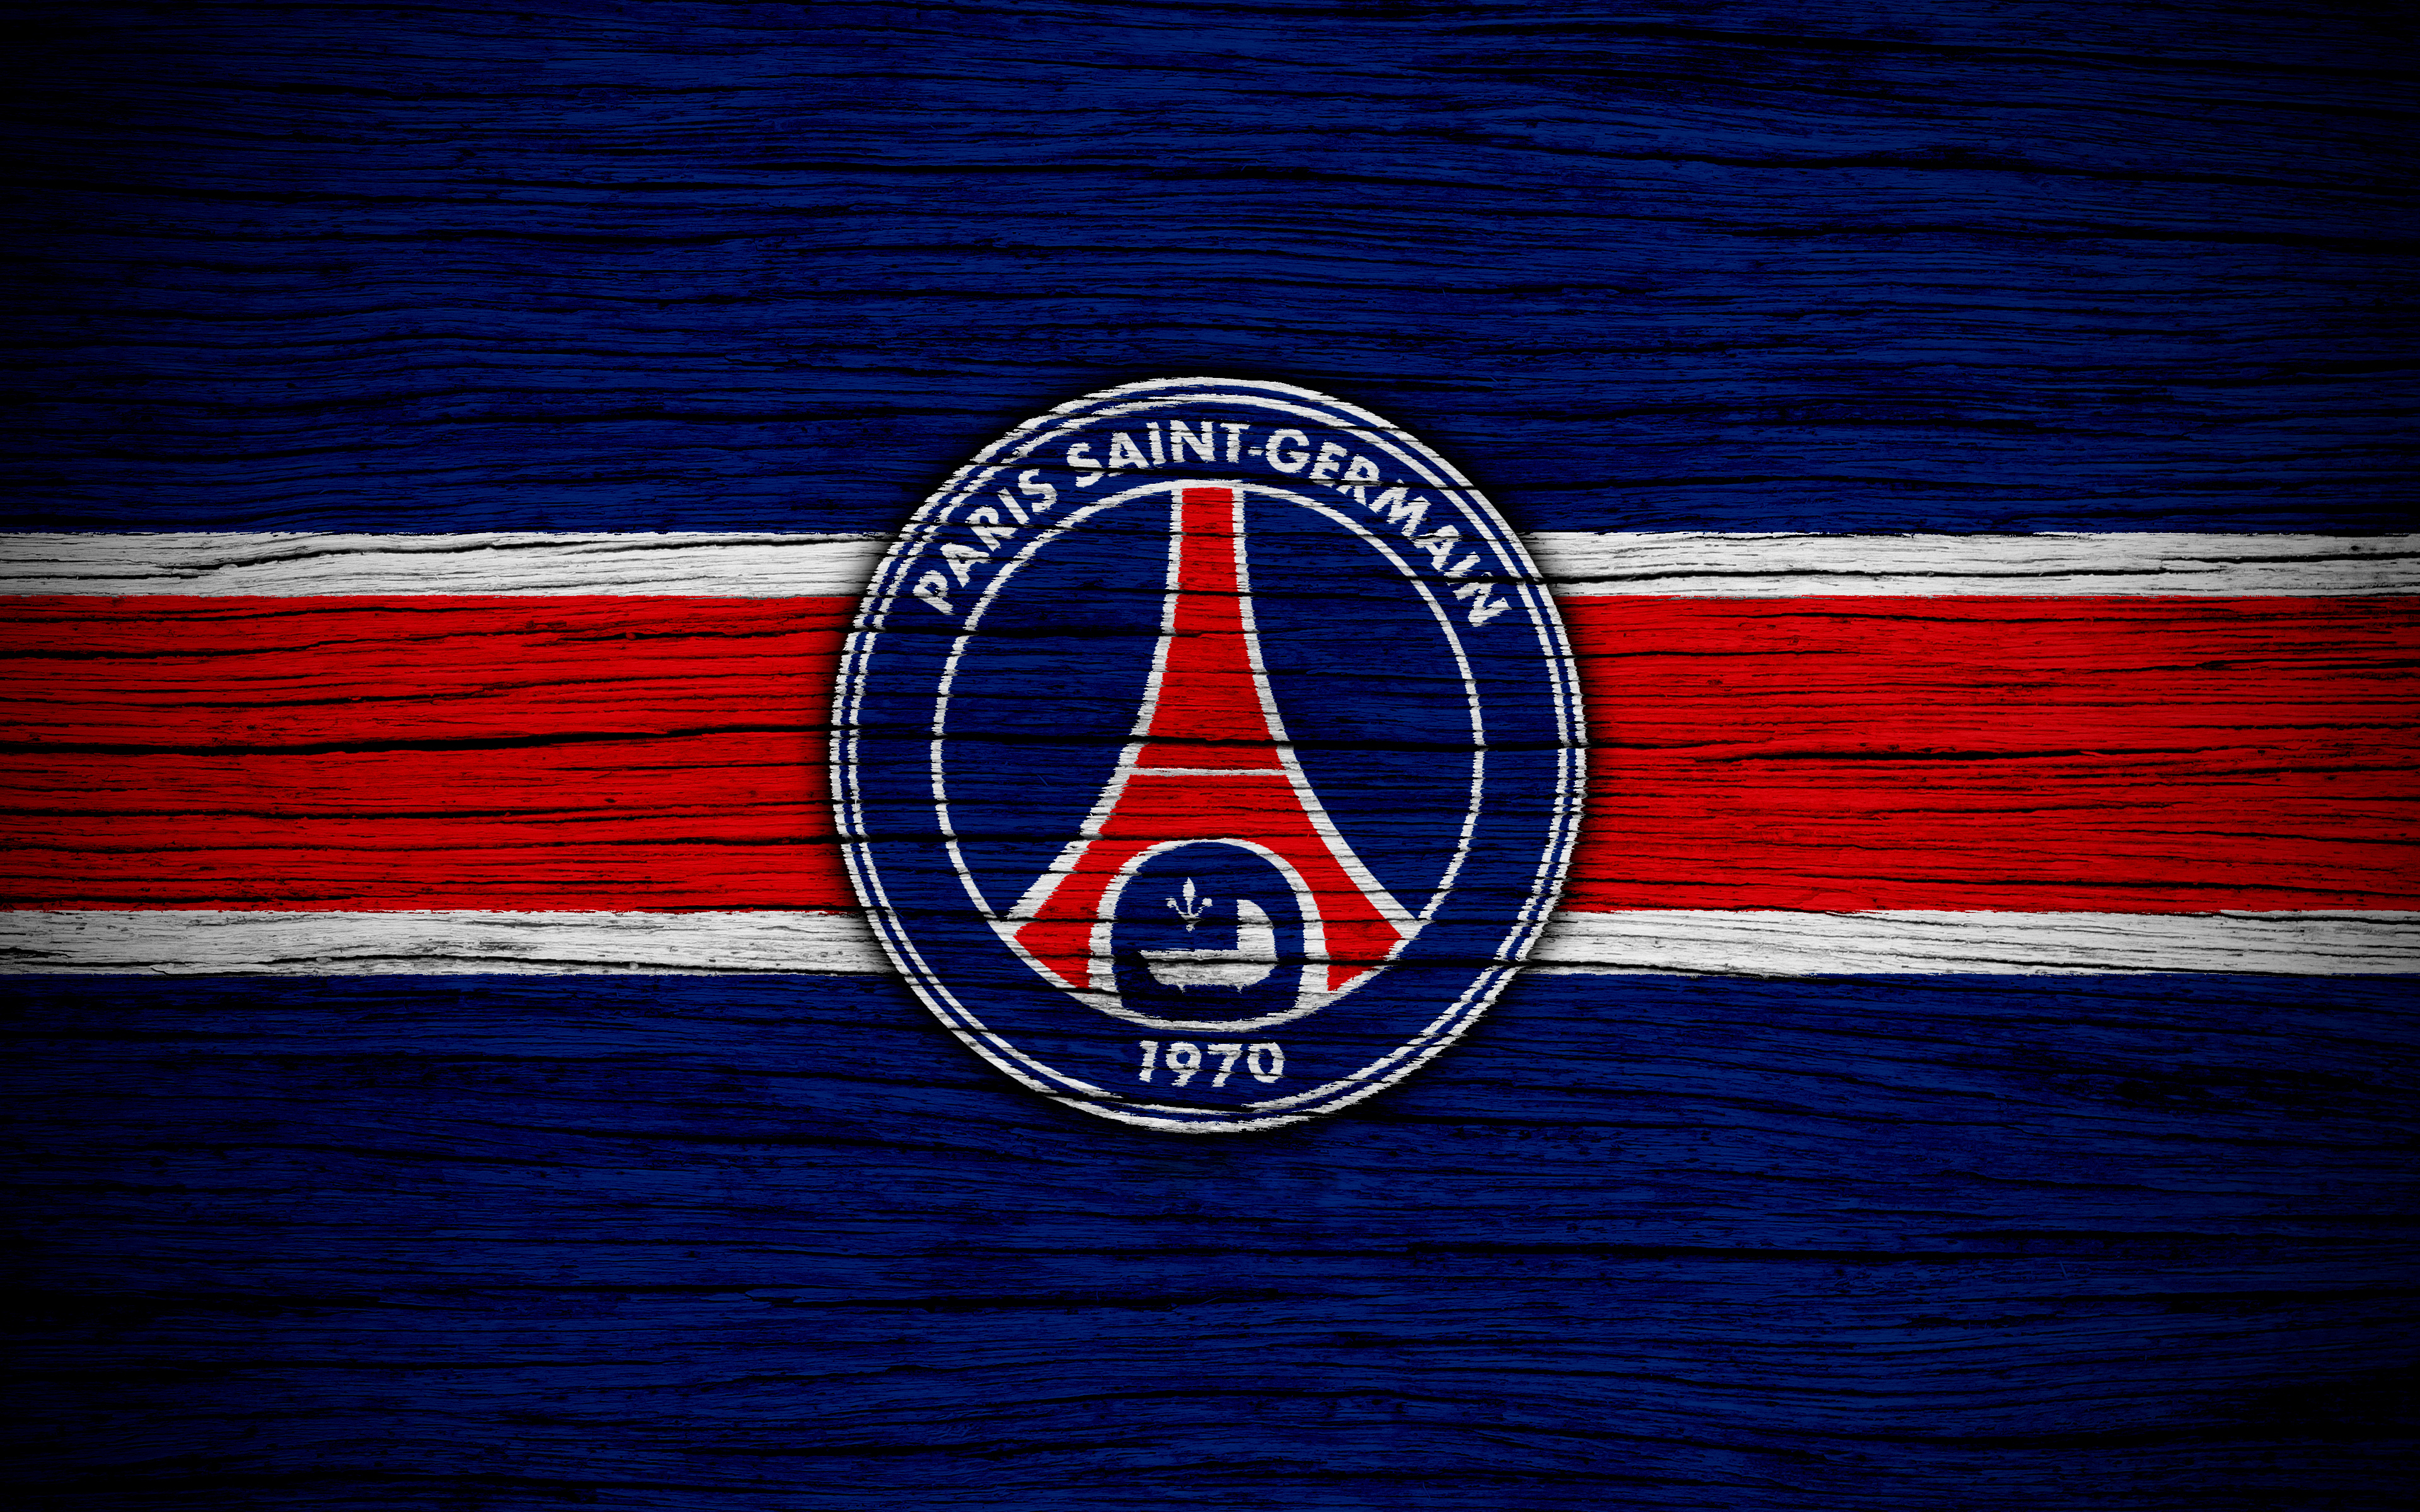 PSG Wallpapers HD 4K for Android  Download